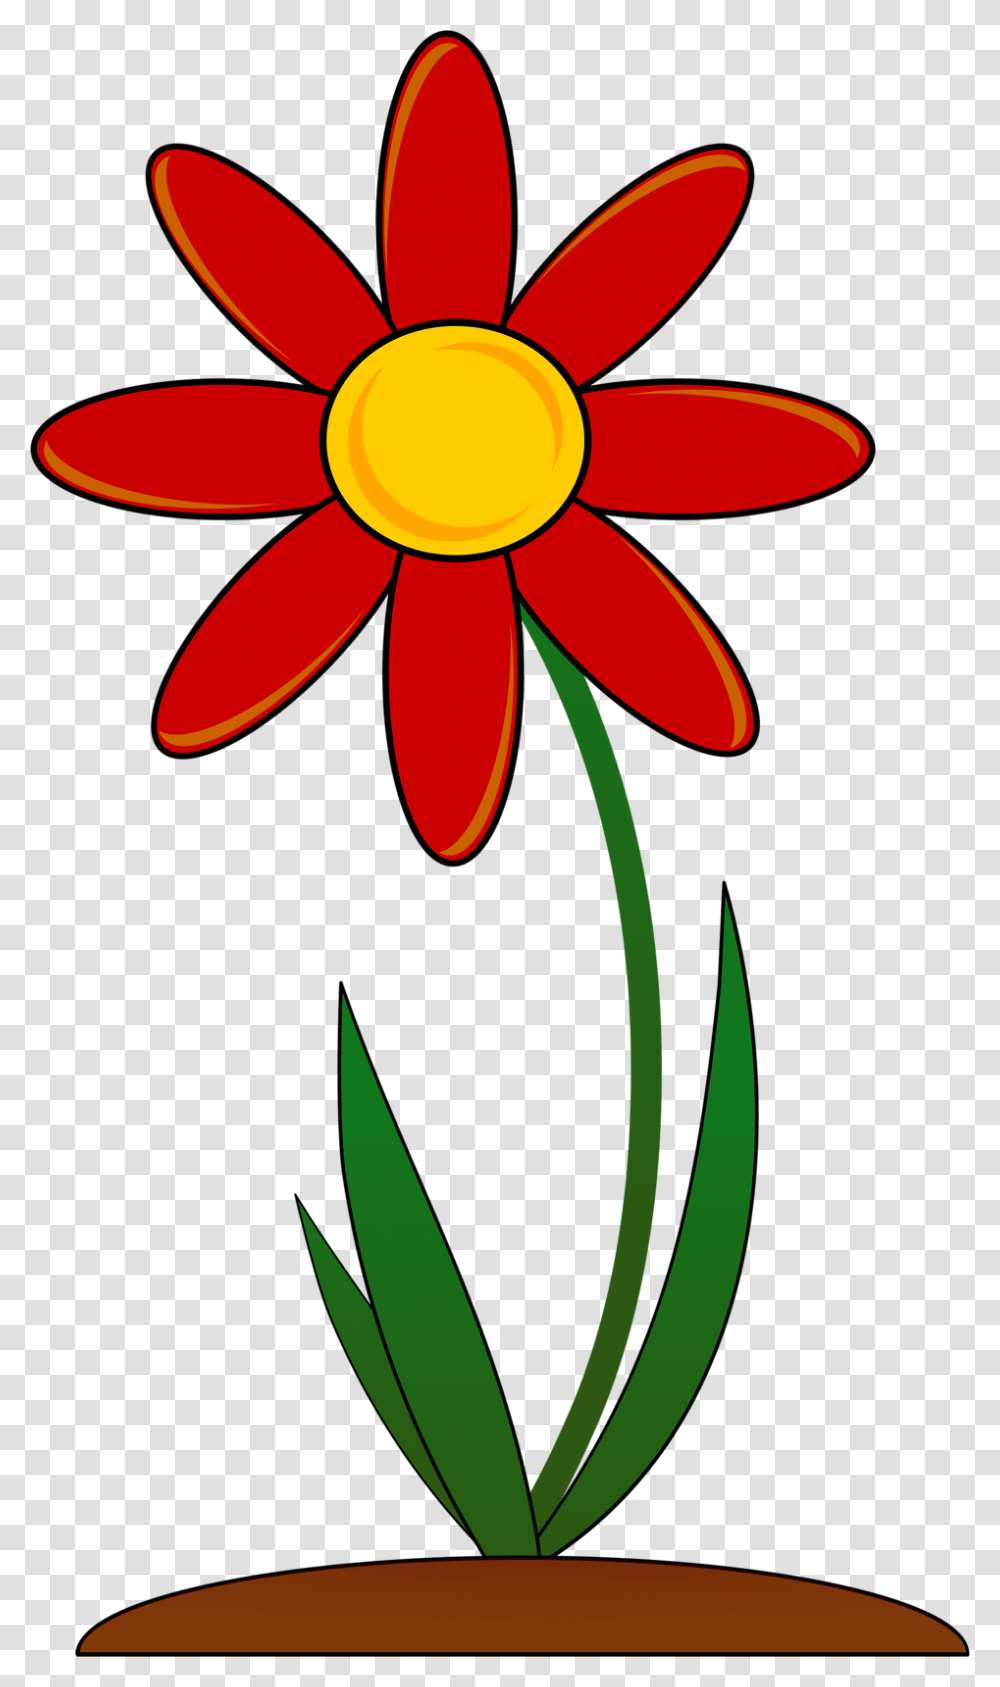 Flower Red Free Stock Photo Illustration Of A Red Flower, Plant, Daisy, Daisies, Blossom Transparent Png